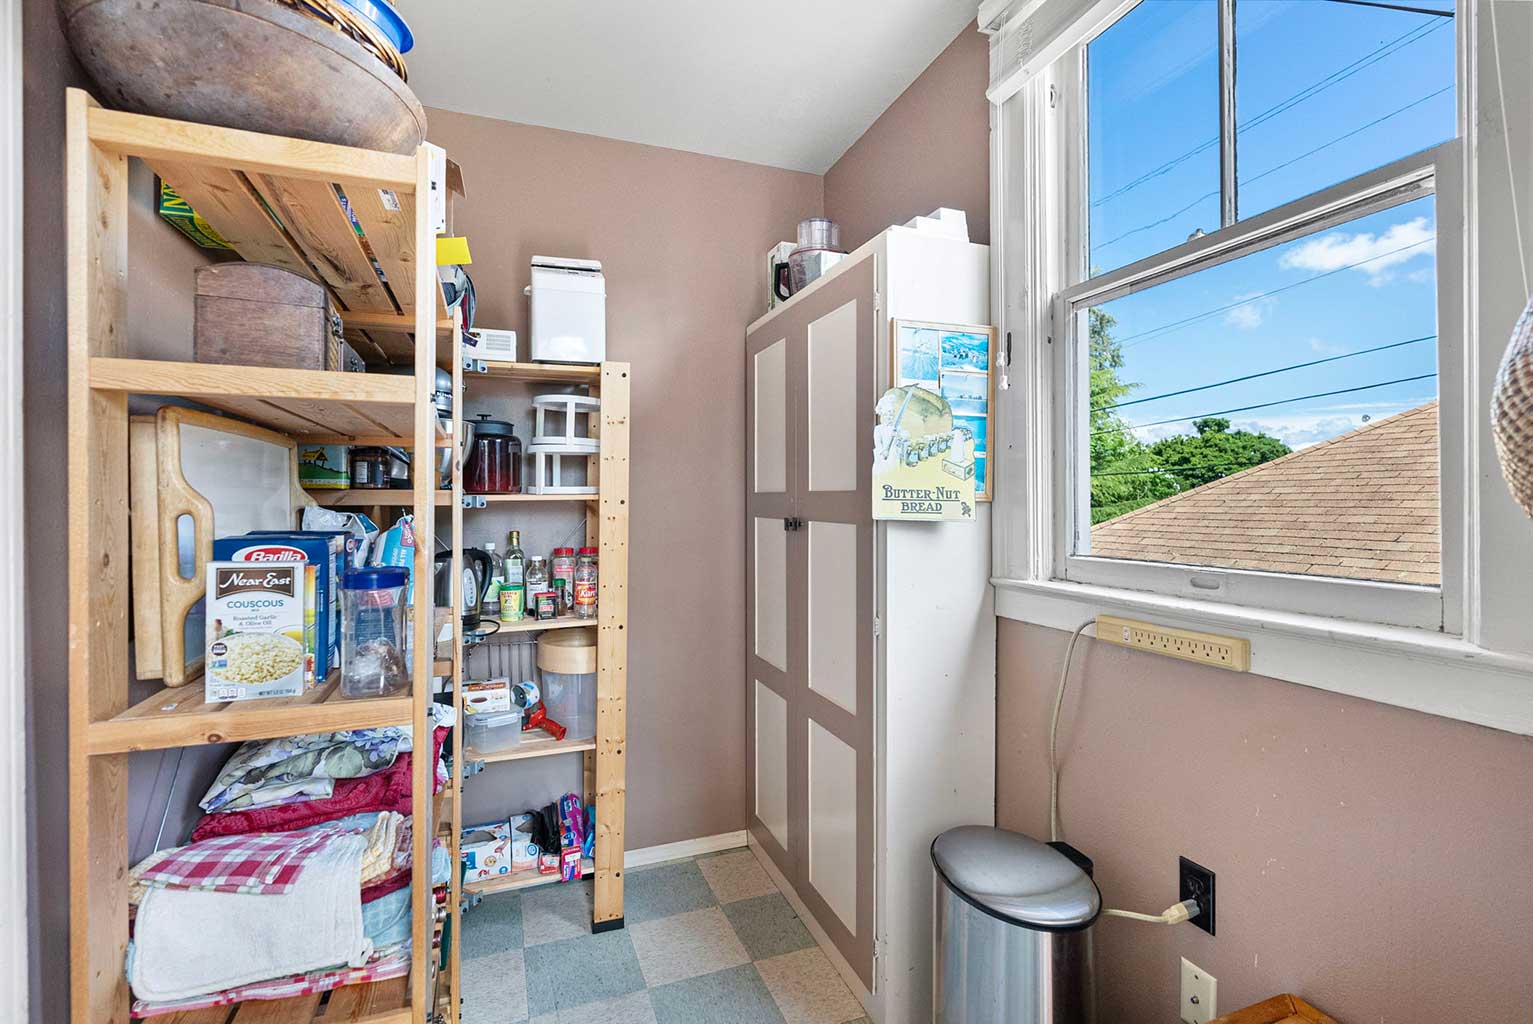 Mudroom off the kitchen is currently used as a pantry